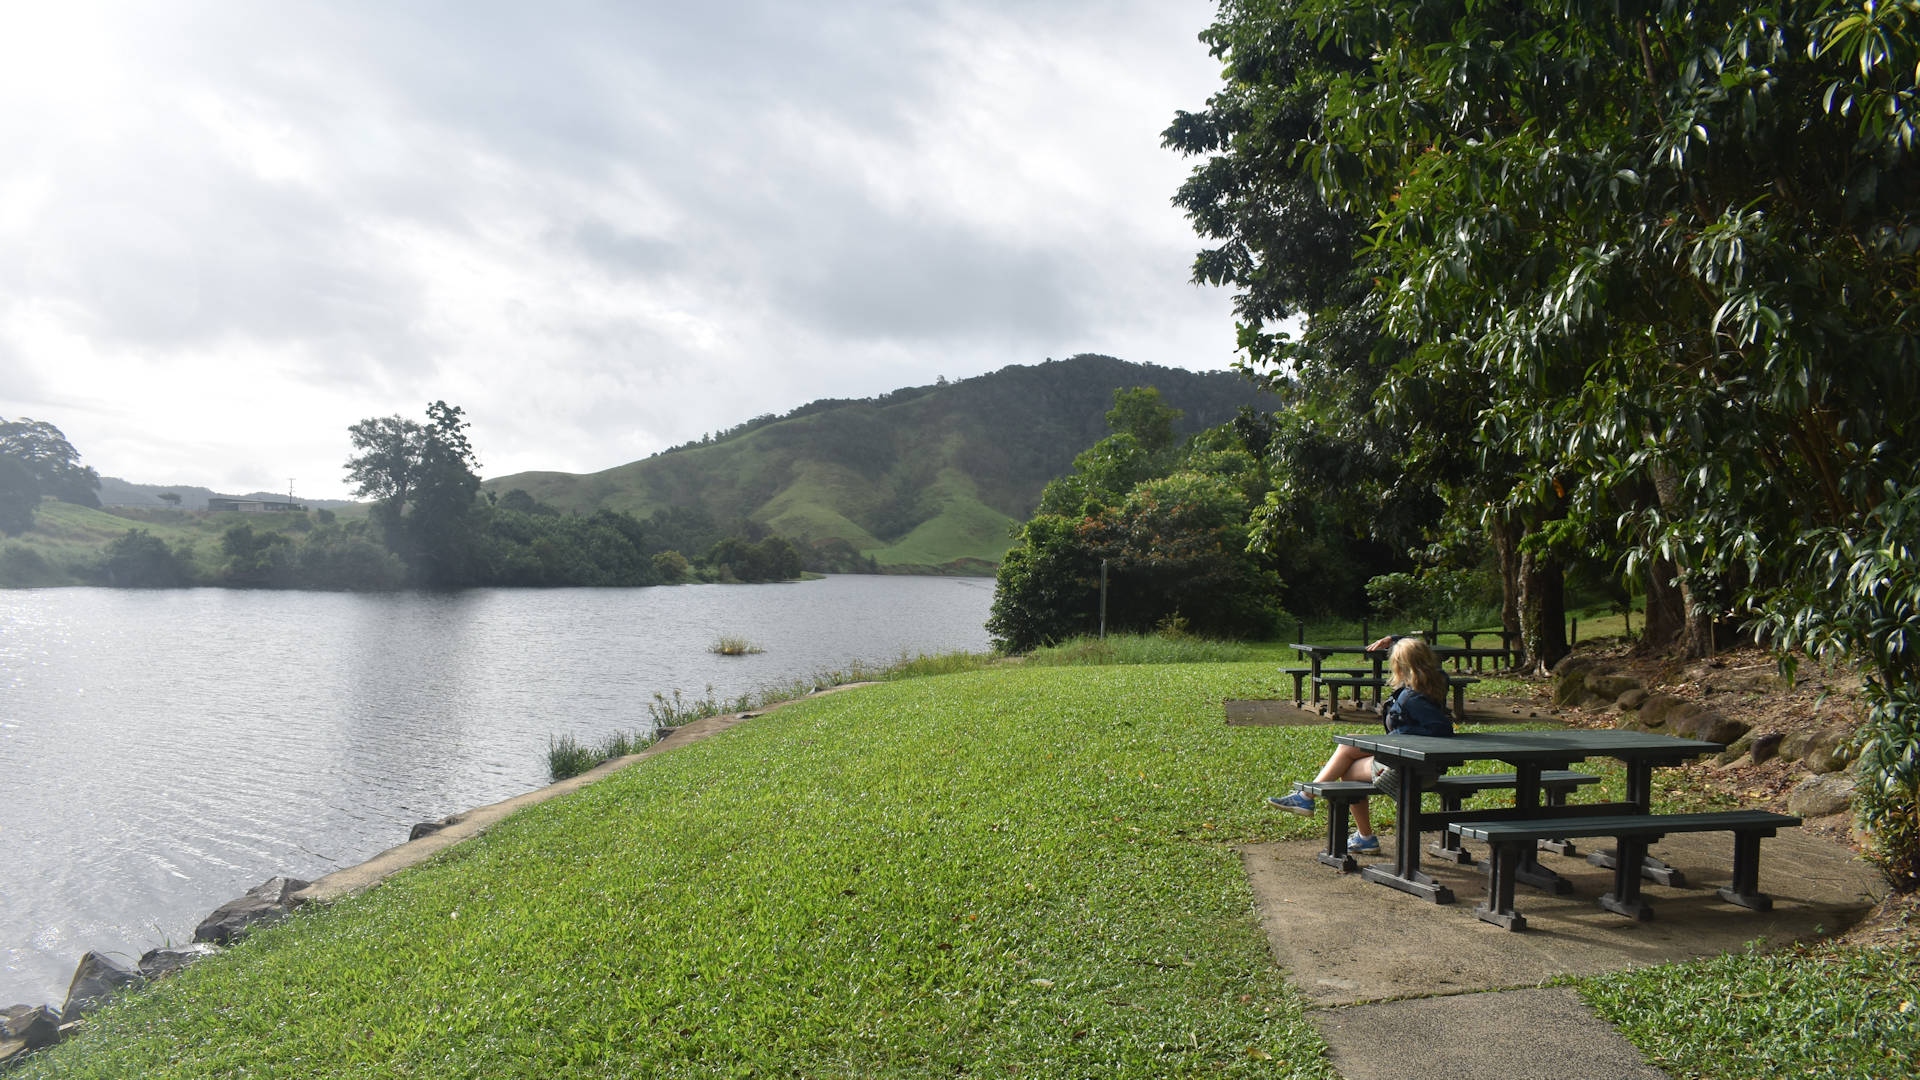 Picnic area next to a river, taken at the Daintree River down the hill from Daintree Village